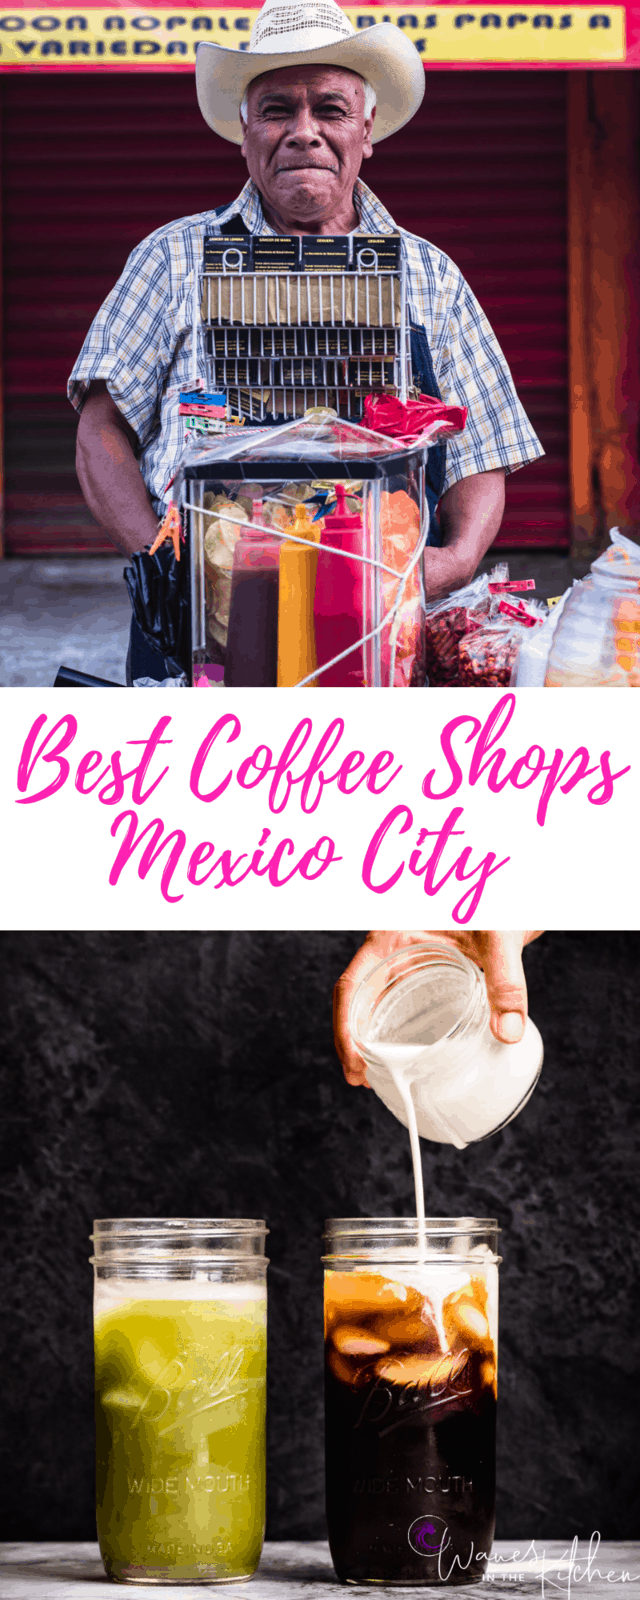 A man selling street food in Mexico City on top, me pouring cream into a cup of coffee on the bottom.